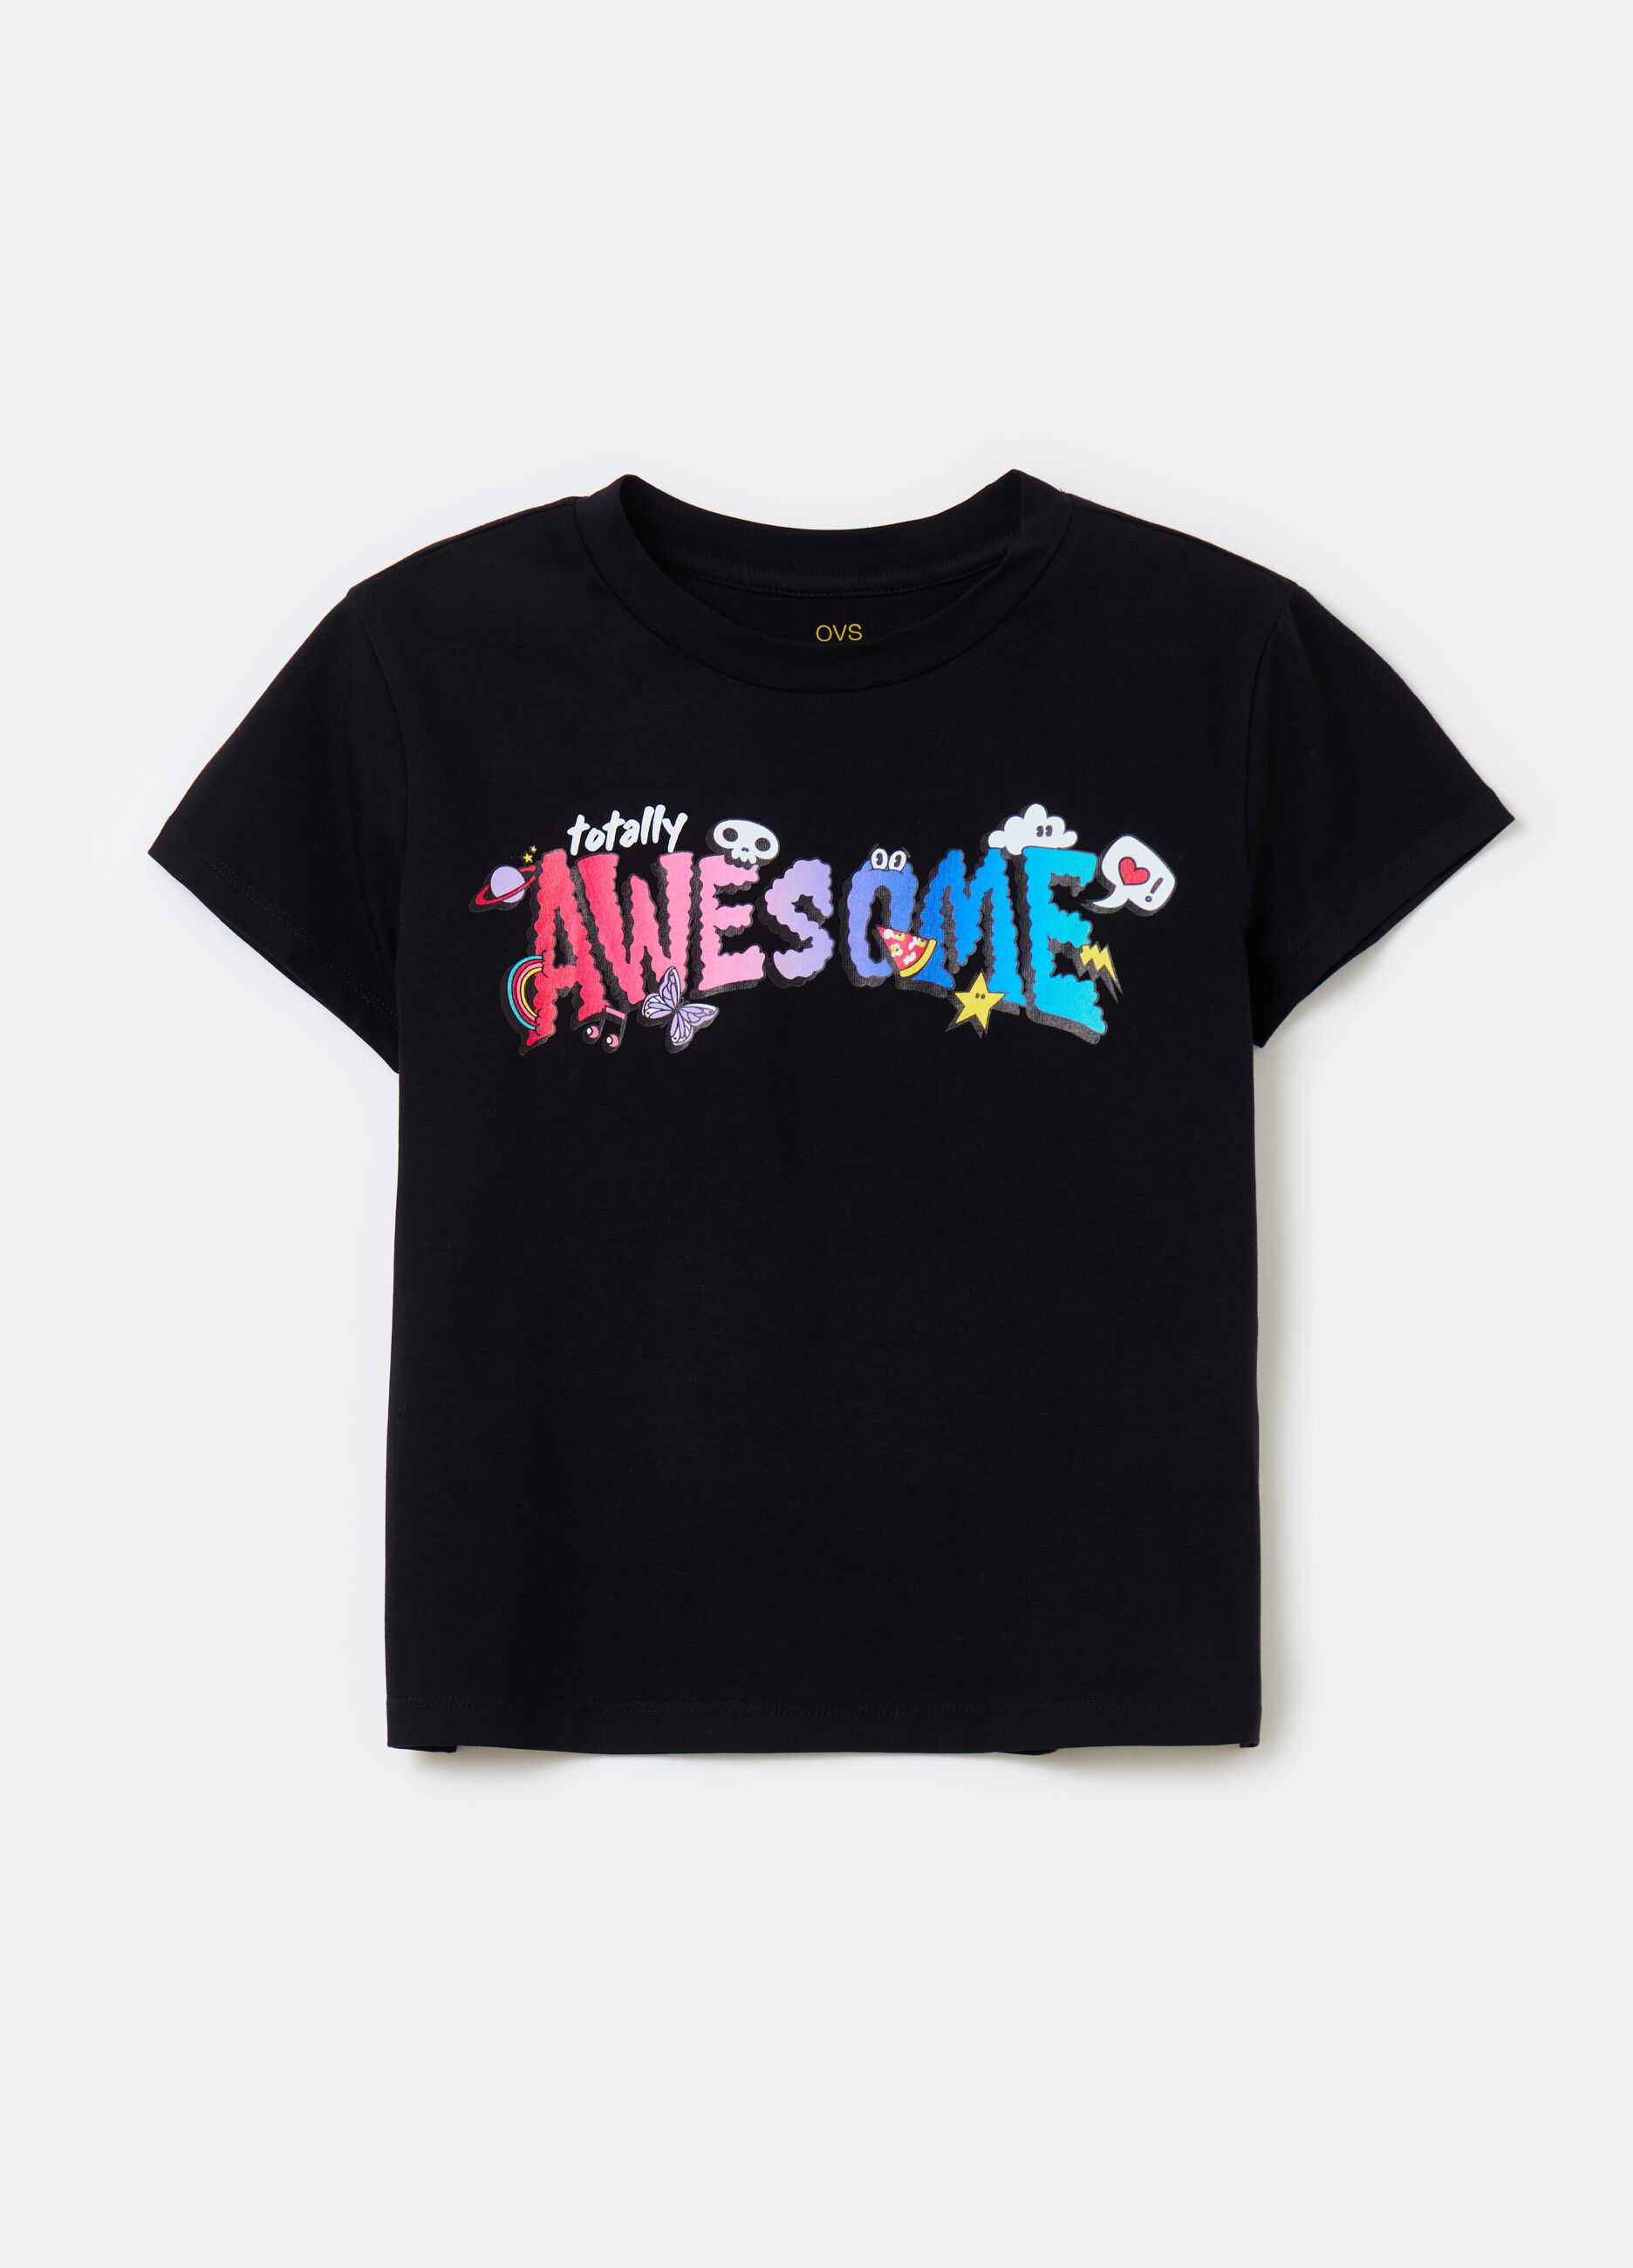 T-shirt in cotone stretch con stampa lettering